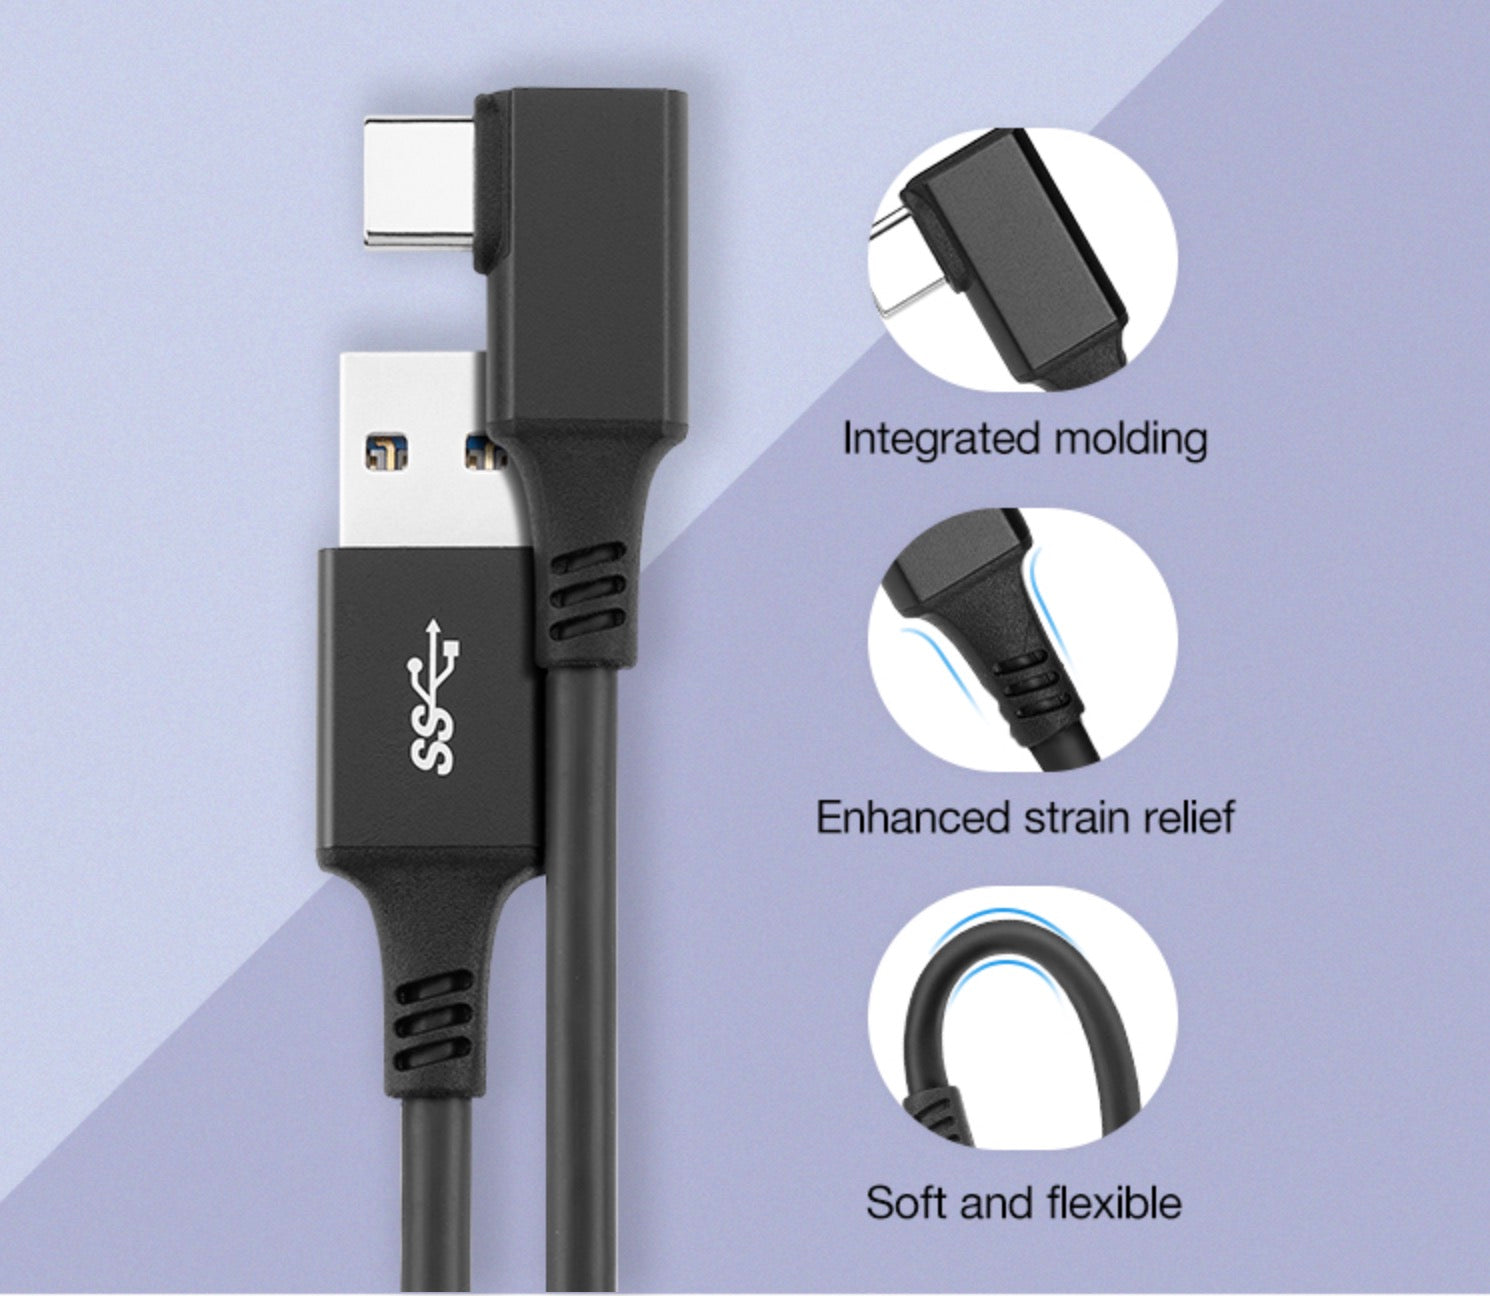 USB-A 3.0 to USB-C High Speed Data Charging Cable for Oculus Quest (6m)